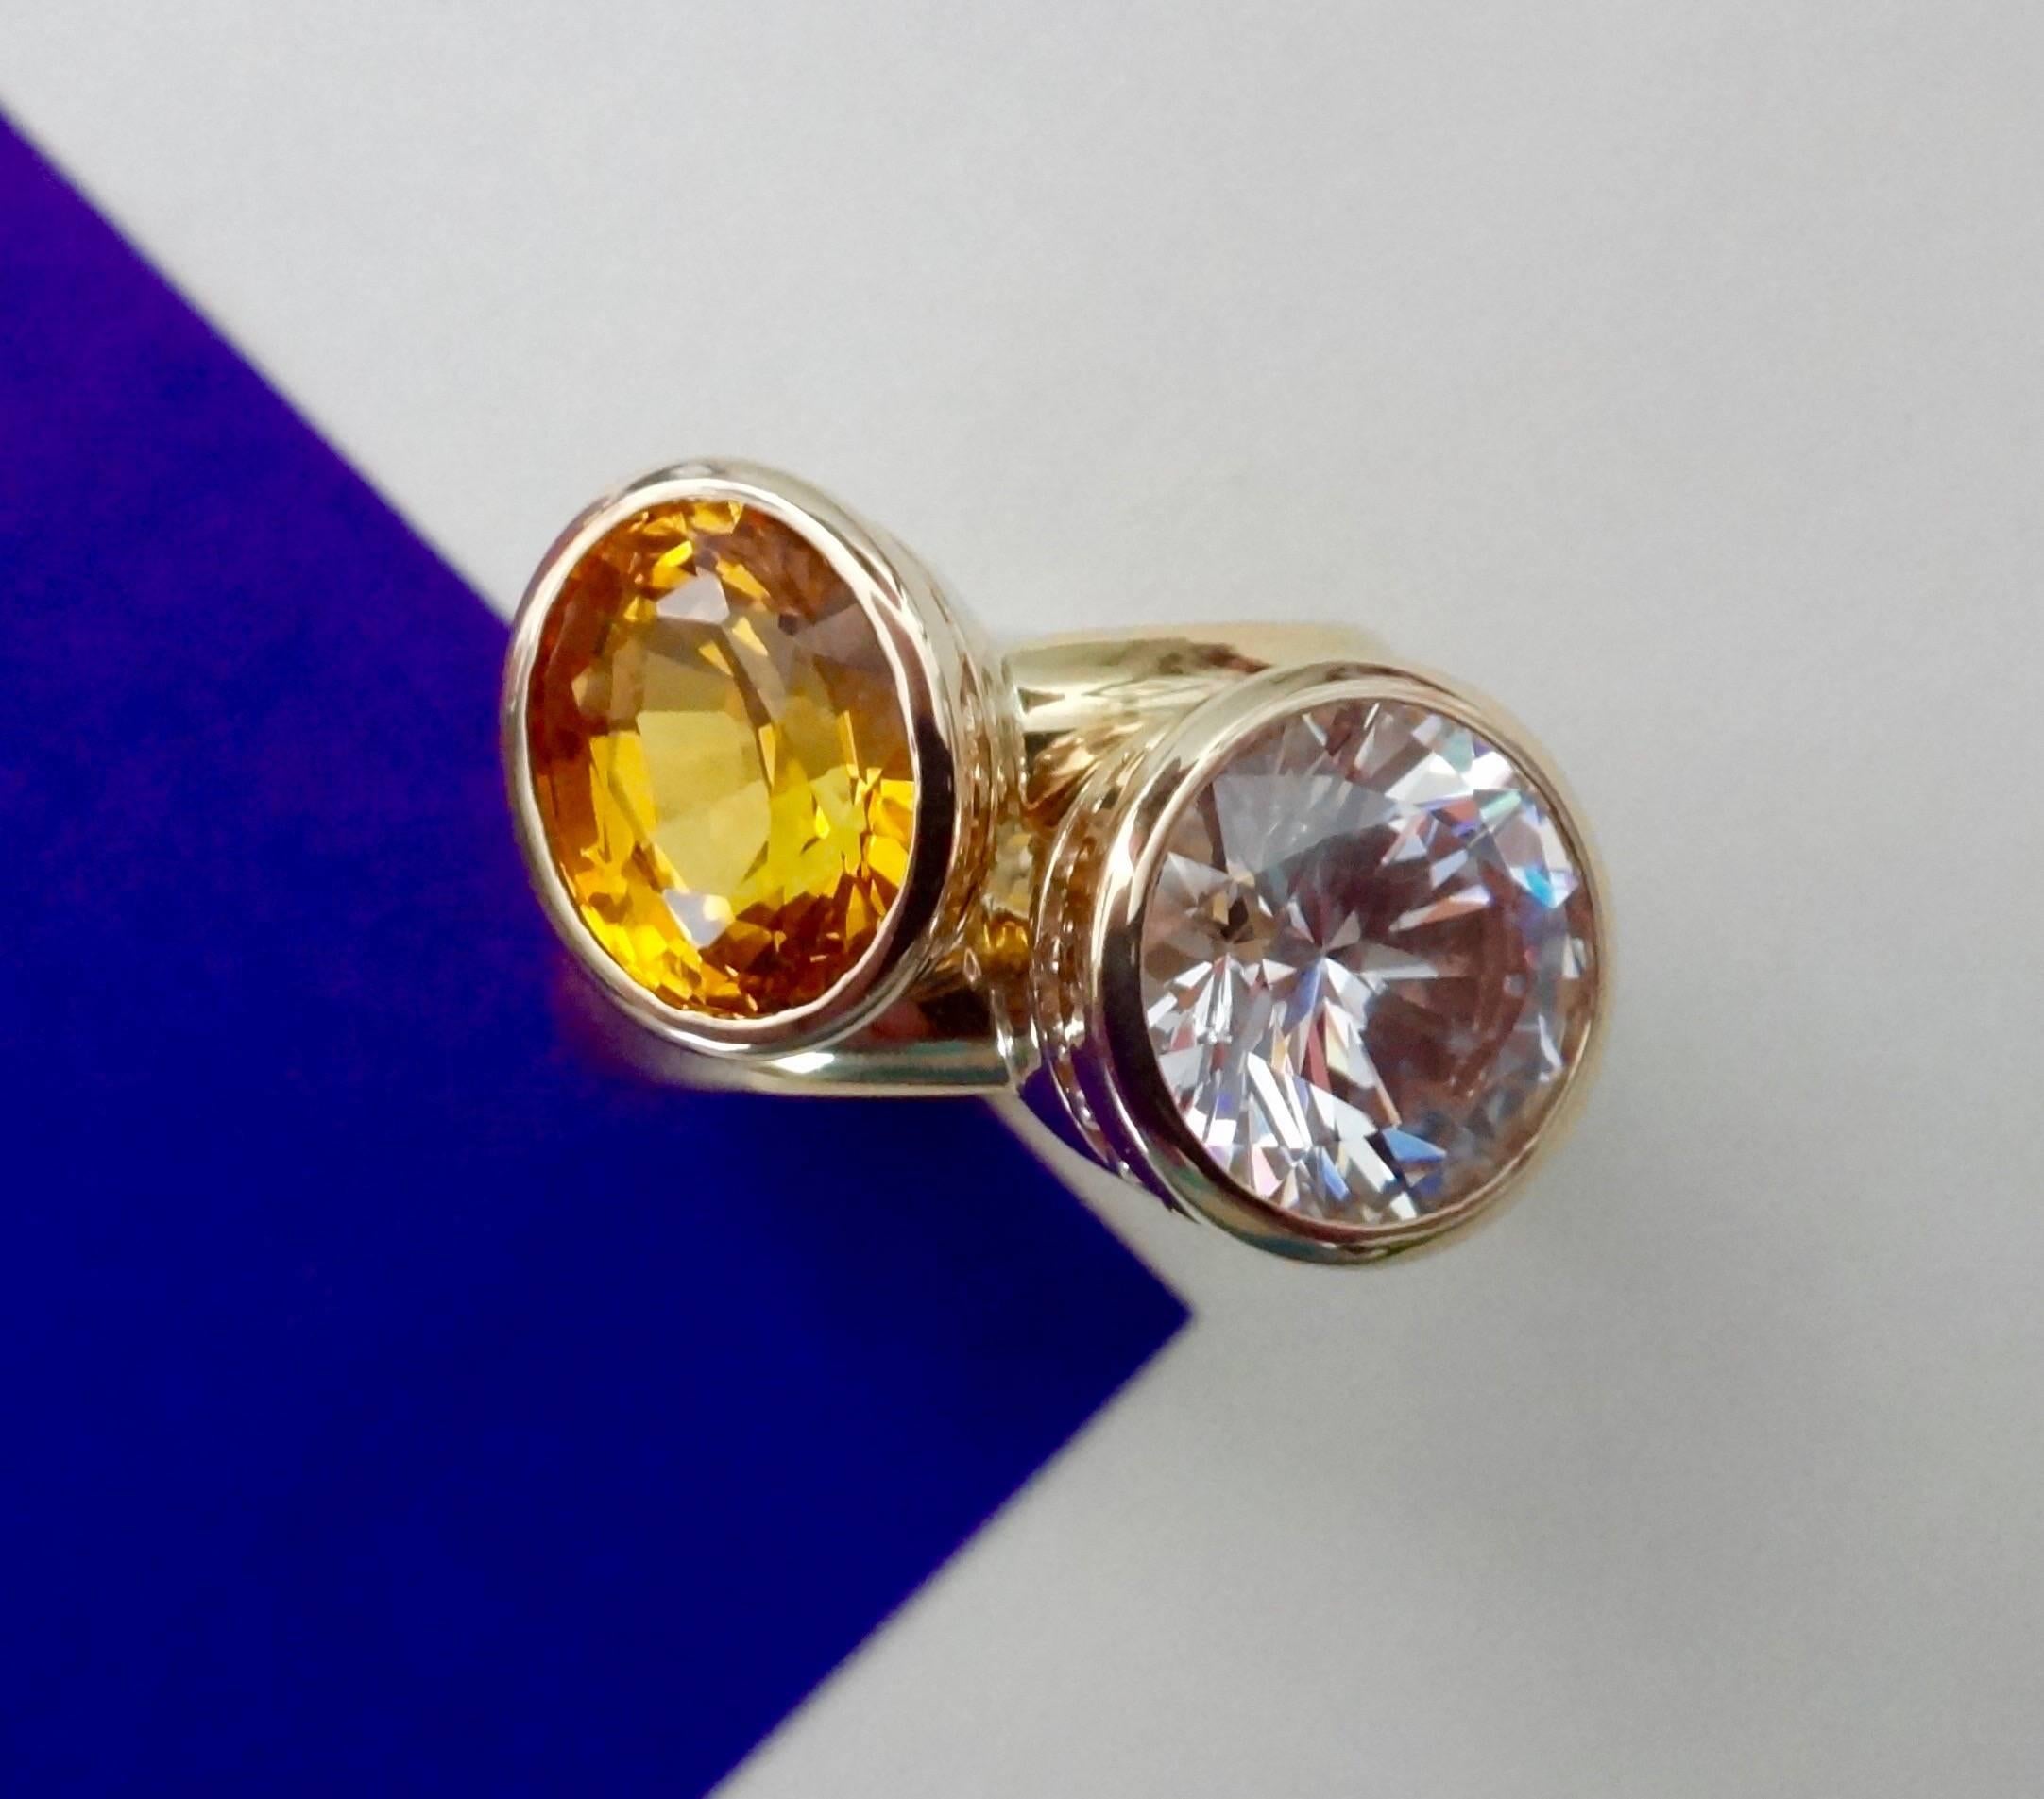 Oval cut and intensely colored yellow sapphire combined with a brilliant cut silver sapphire are set in a pair of 18k yellow gold stacking 